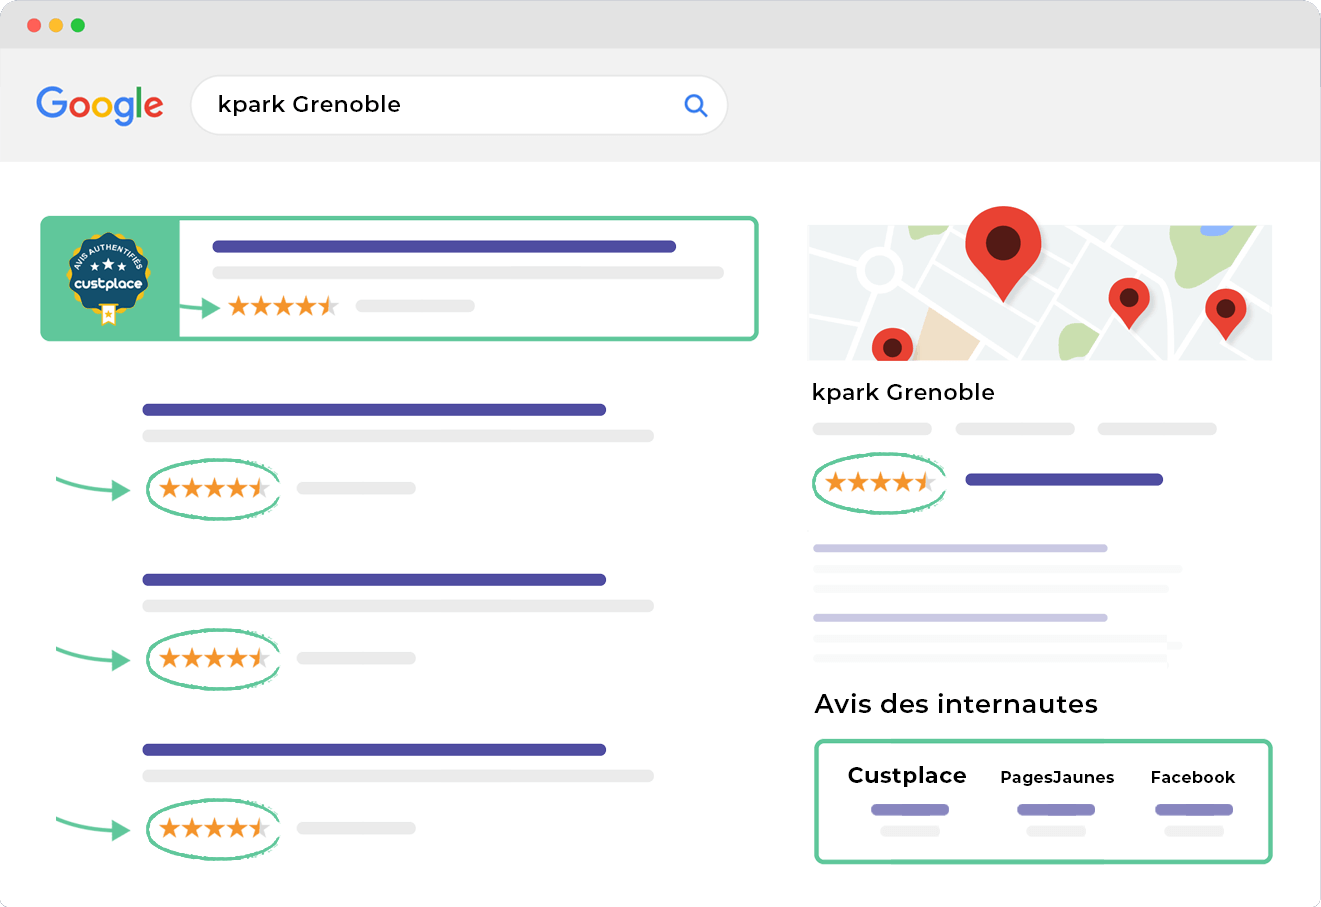 Local online reputation is not just about Google